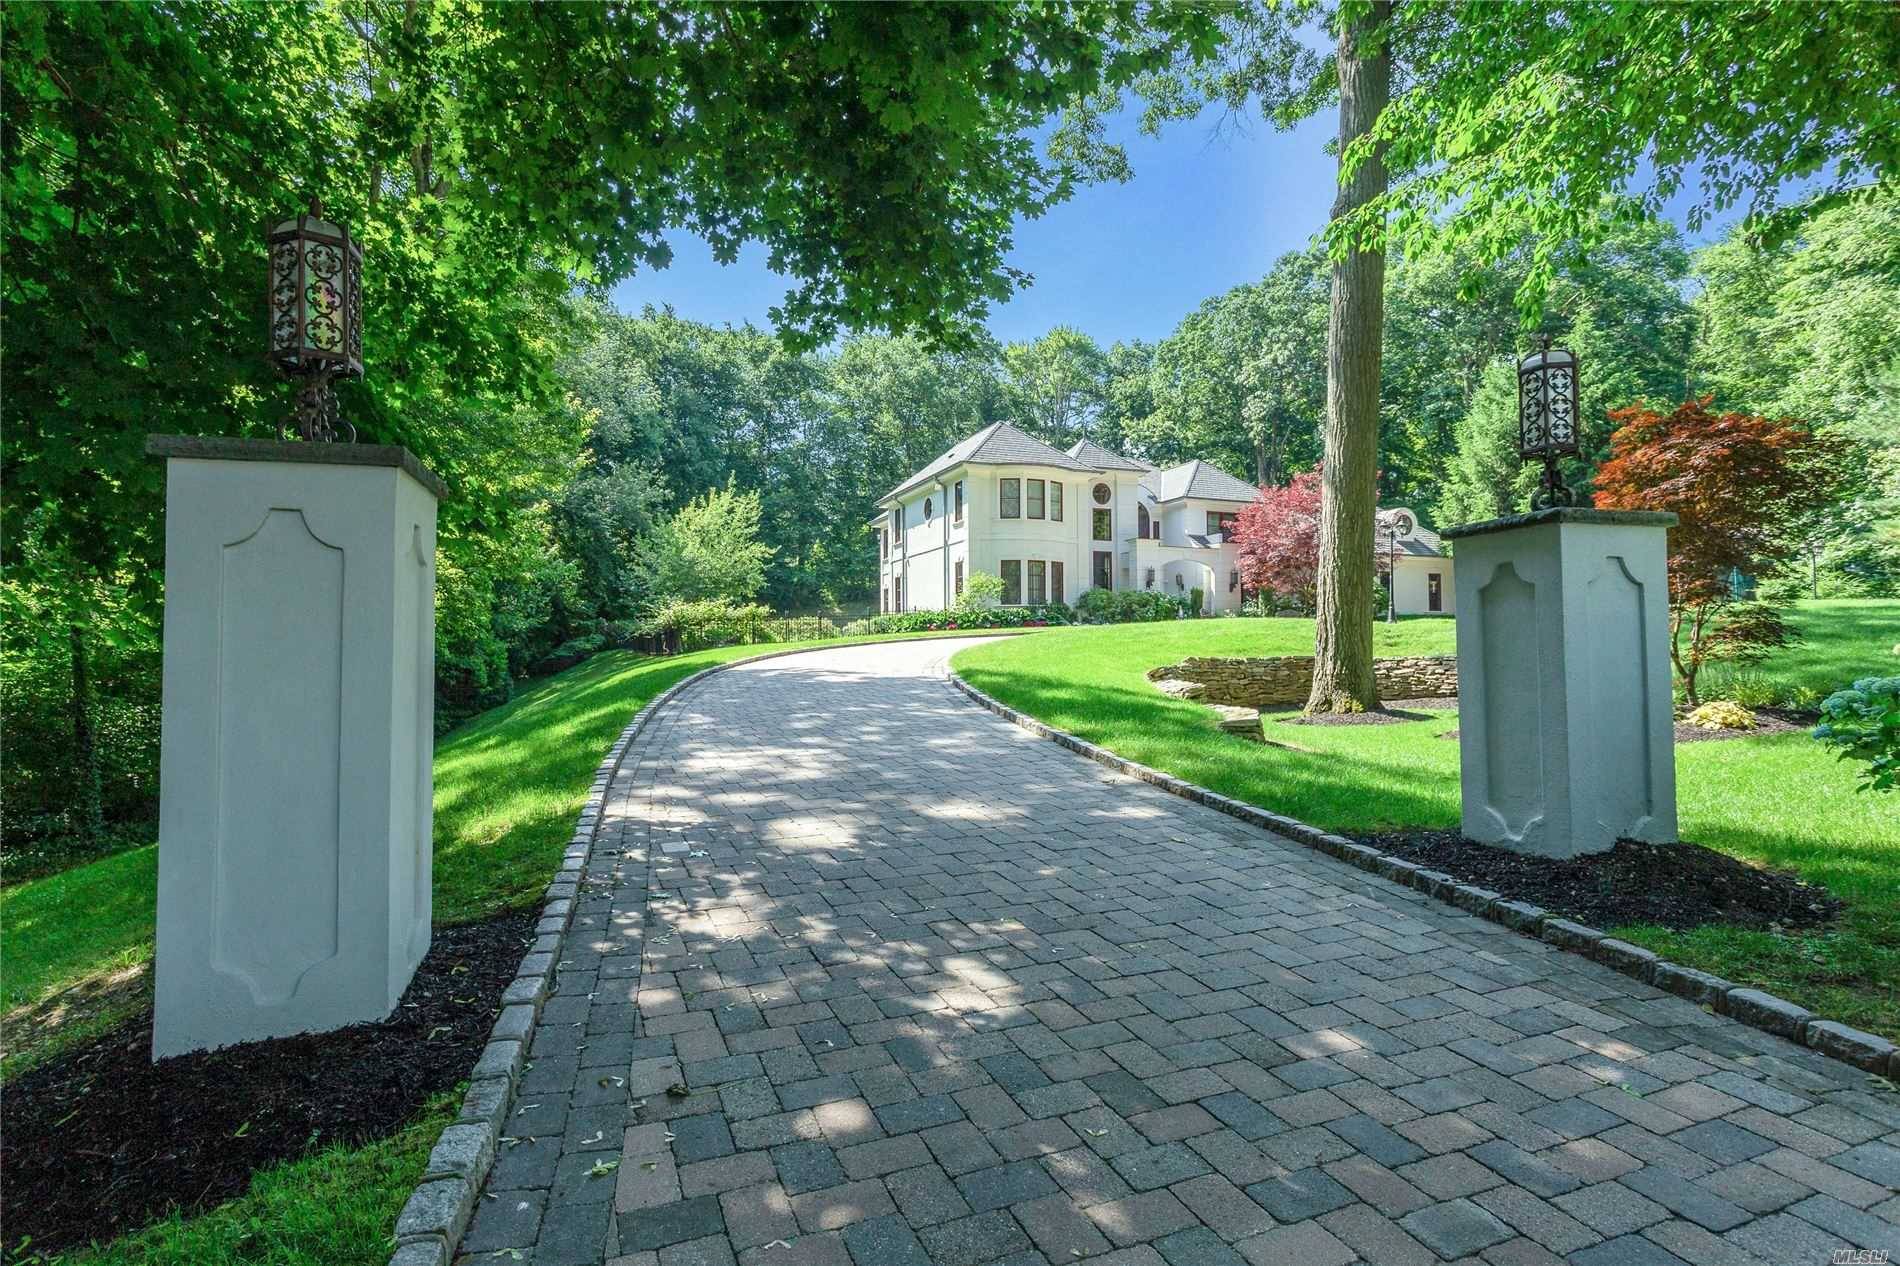 BROOKVILLE. Unmatched Stucco Colonial Located on Over 2 Private Acres In The Village of Brookville.